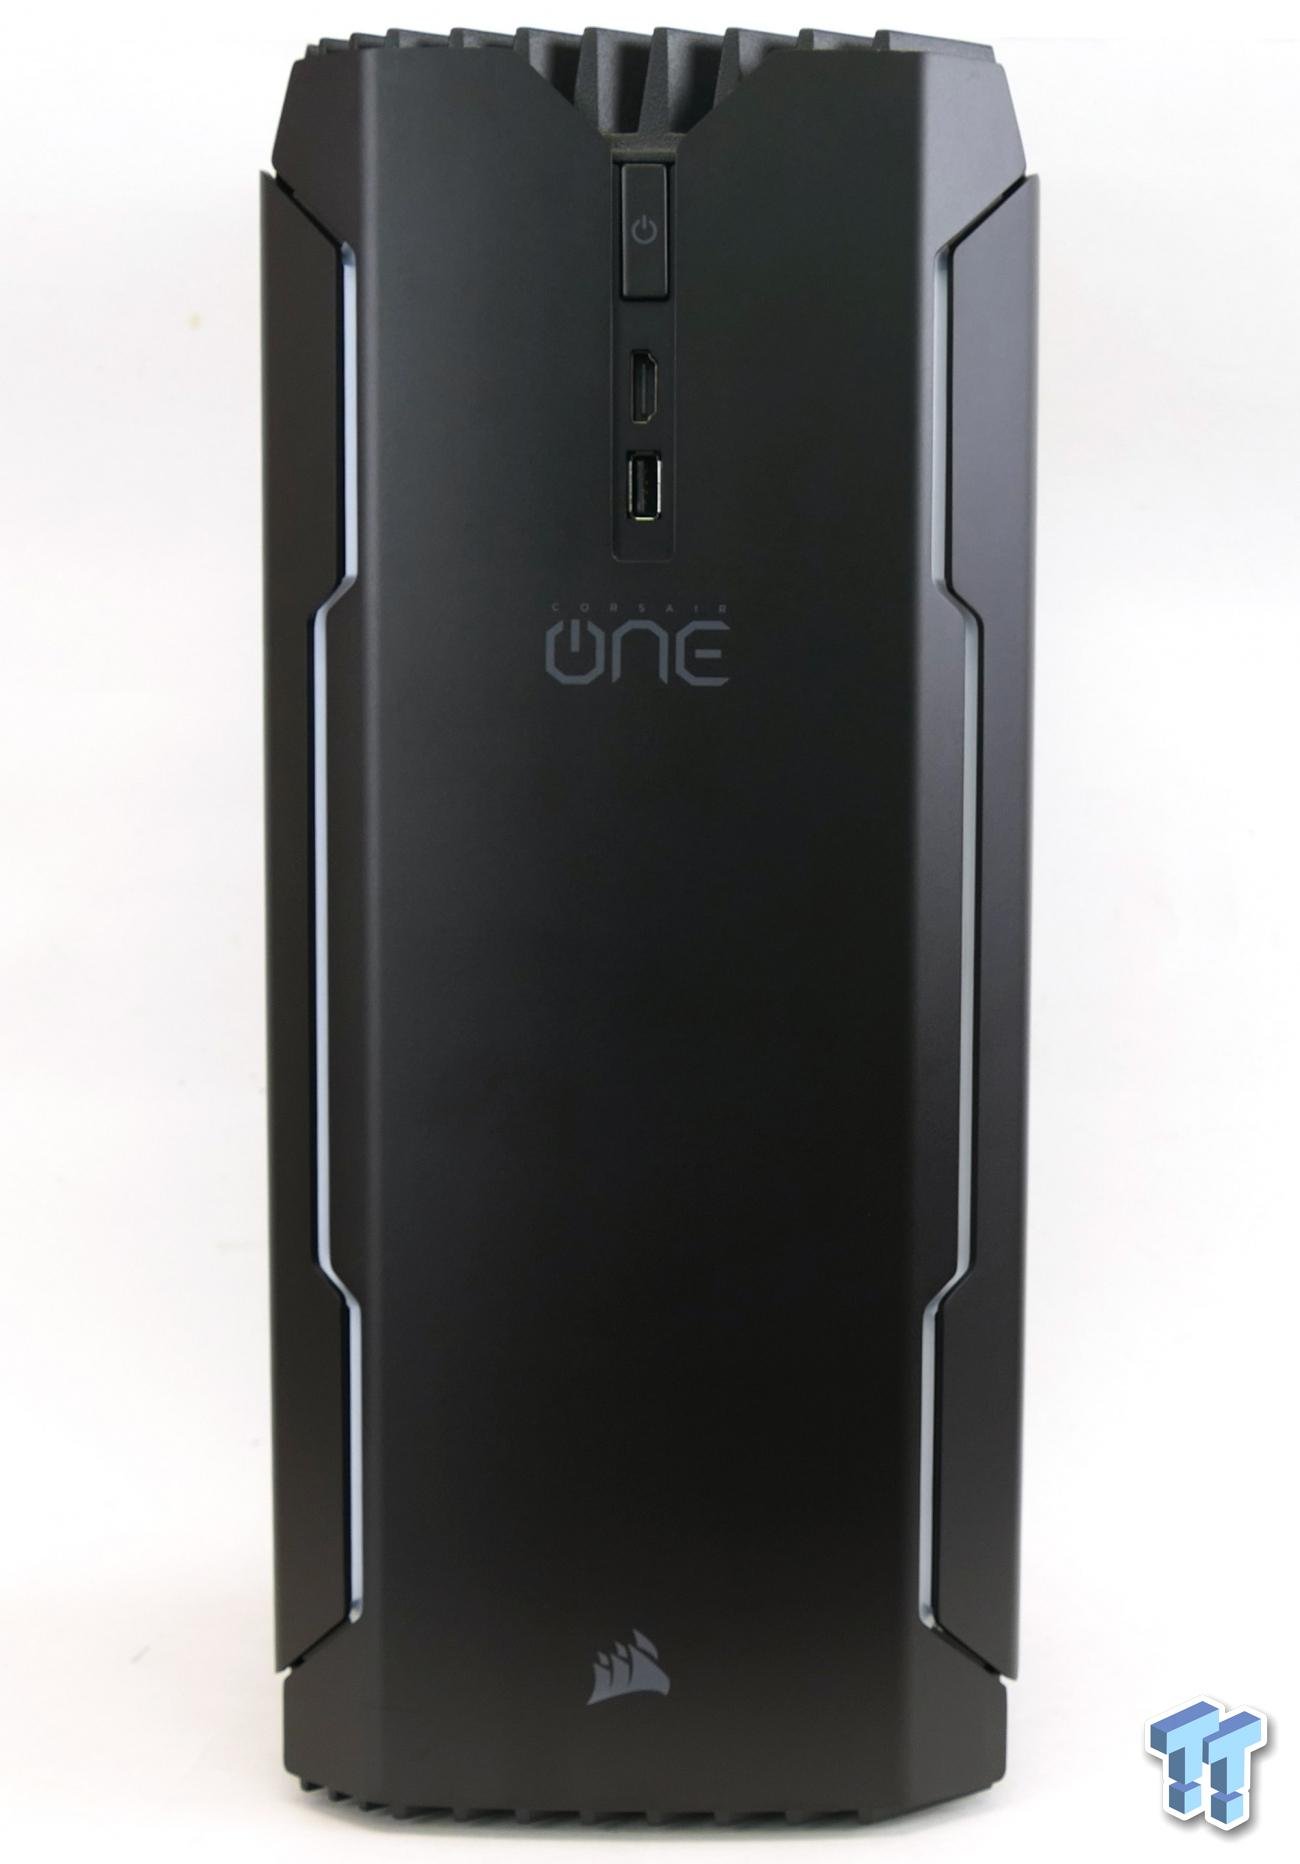 Corsair One i160 gaming PC review: small, powerful, and pricey